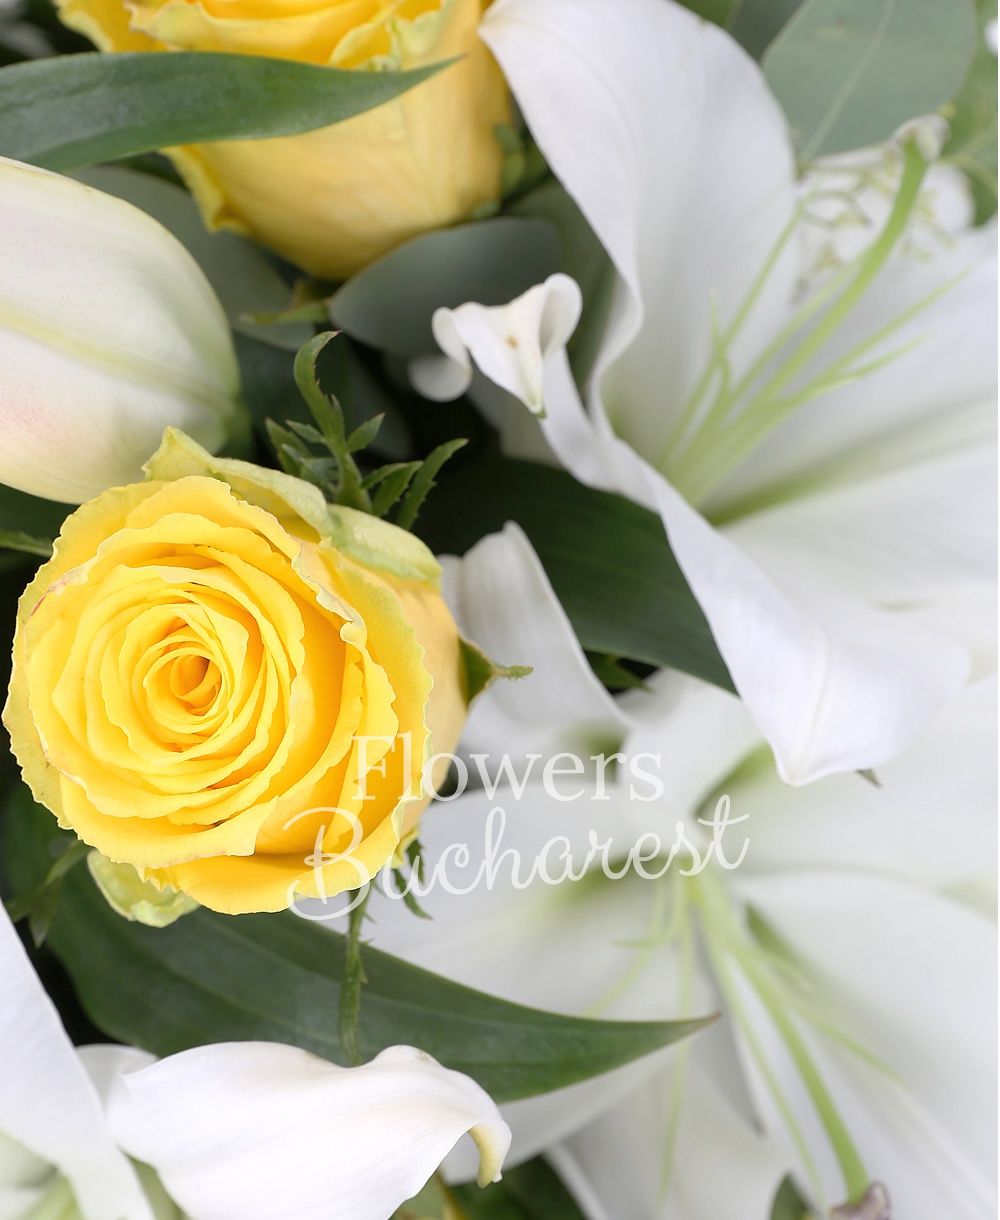 9 yellow roses, 4 white lilies, greenery